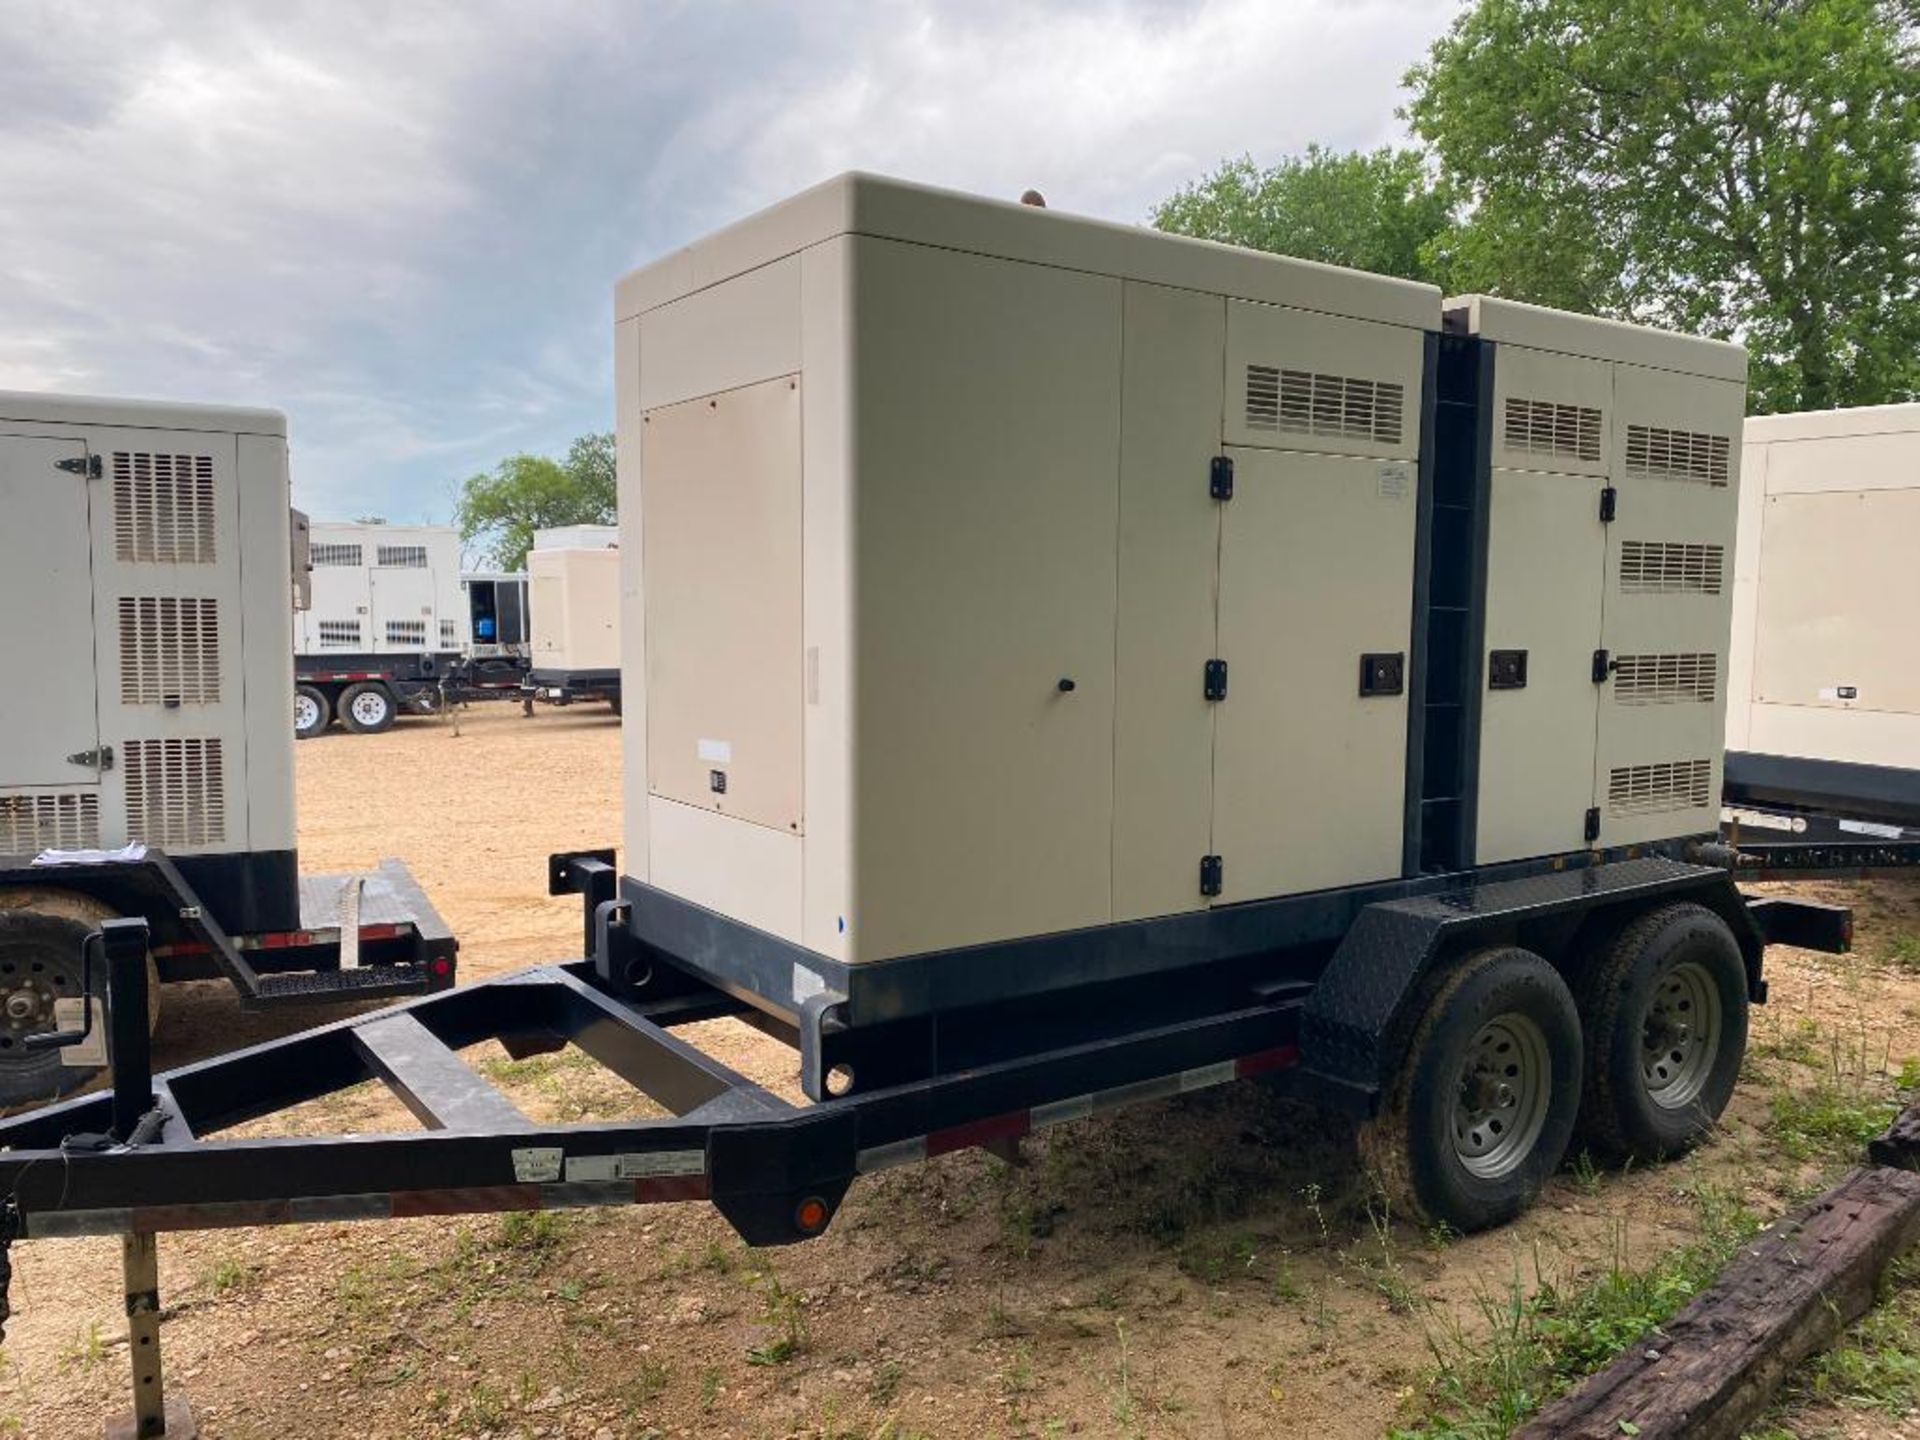 2014 AltaStream Power Systems 125 KVA Towable Generator, Dual Fuel Natural Gas or LP, Model APHG150- - Image 3 of 14